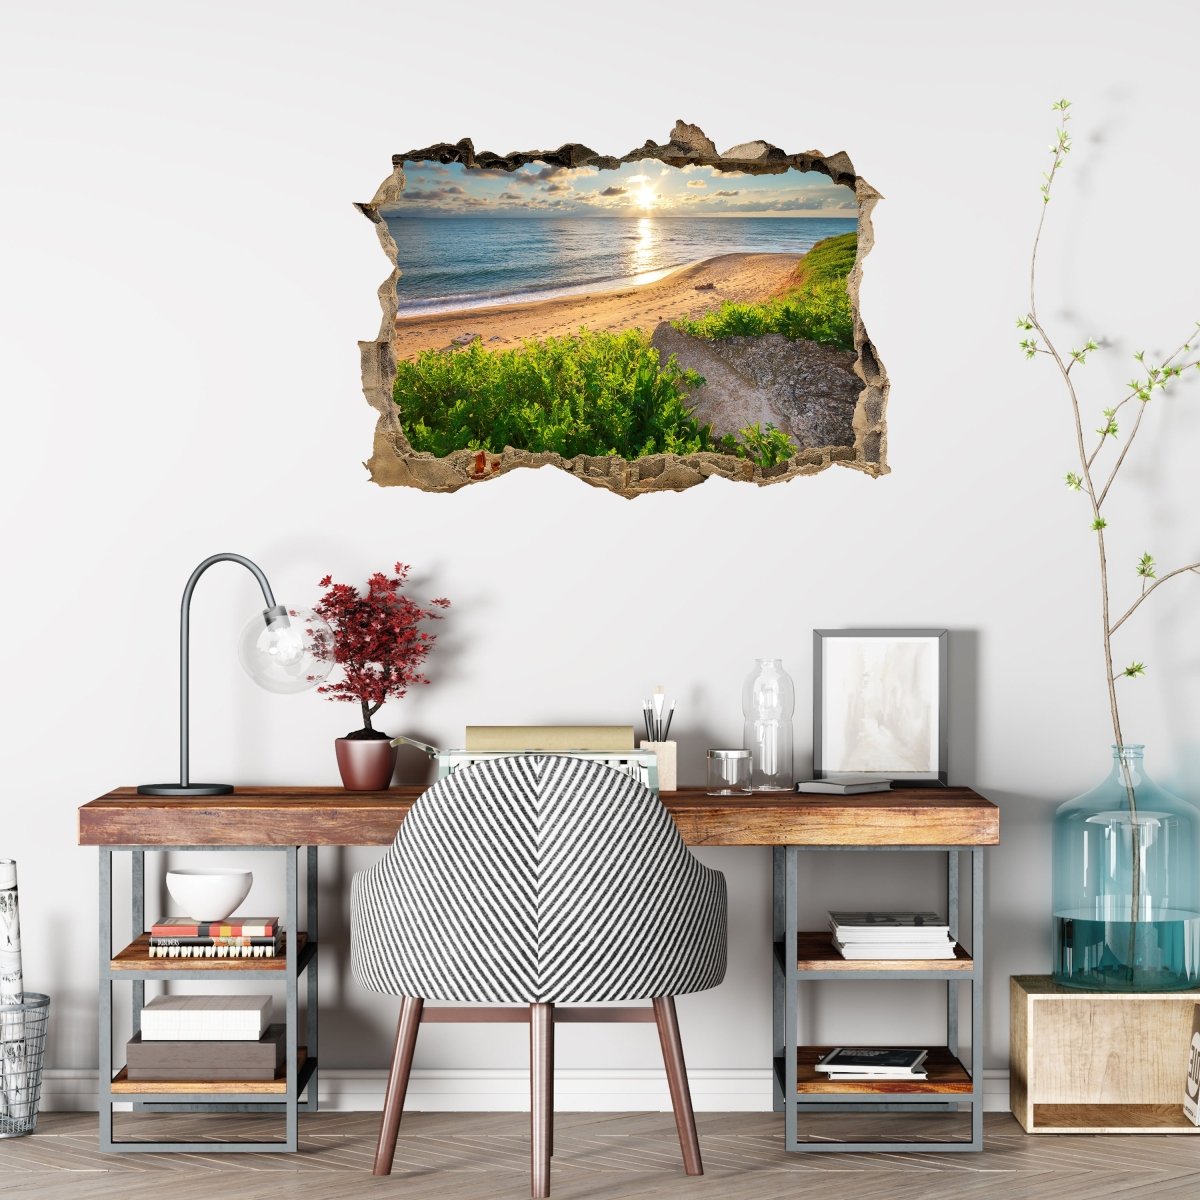 3D wall sticker sky, sea and green grass - Wall Decal M0922